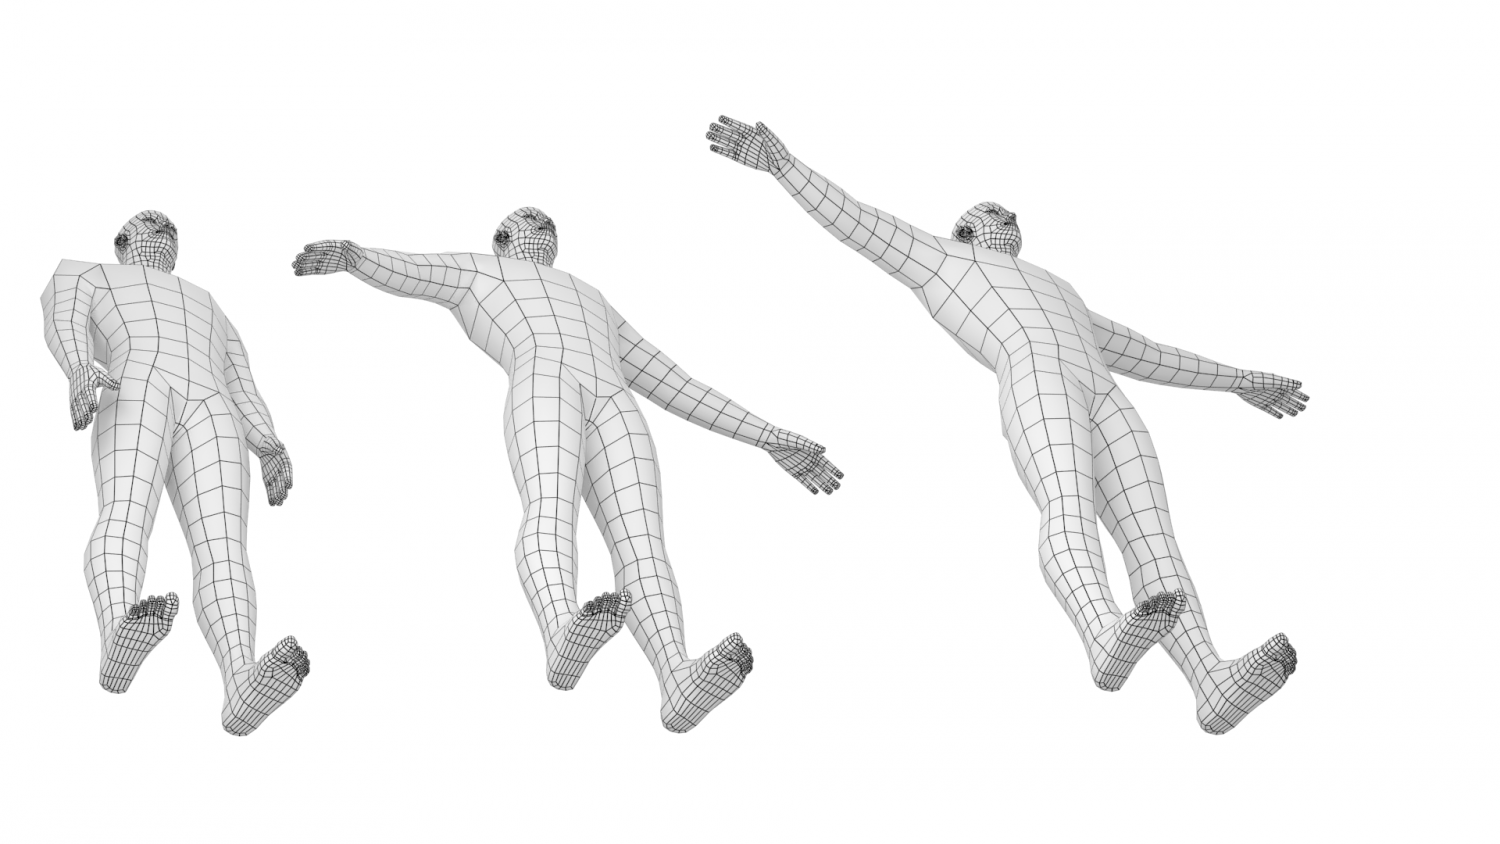 Rig in T pose and mesh in A pose after import - Daz 3D Forums